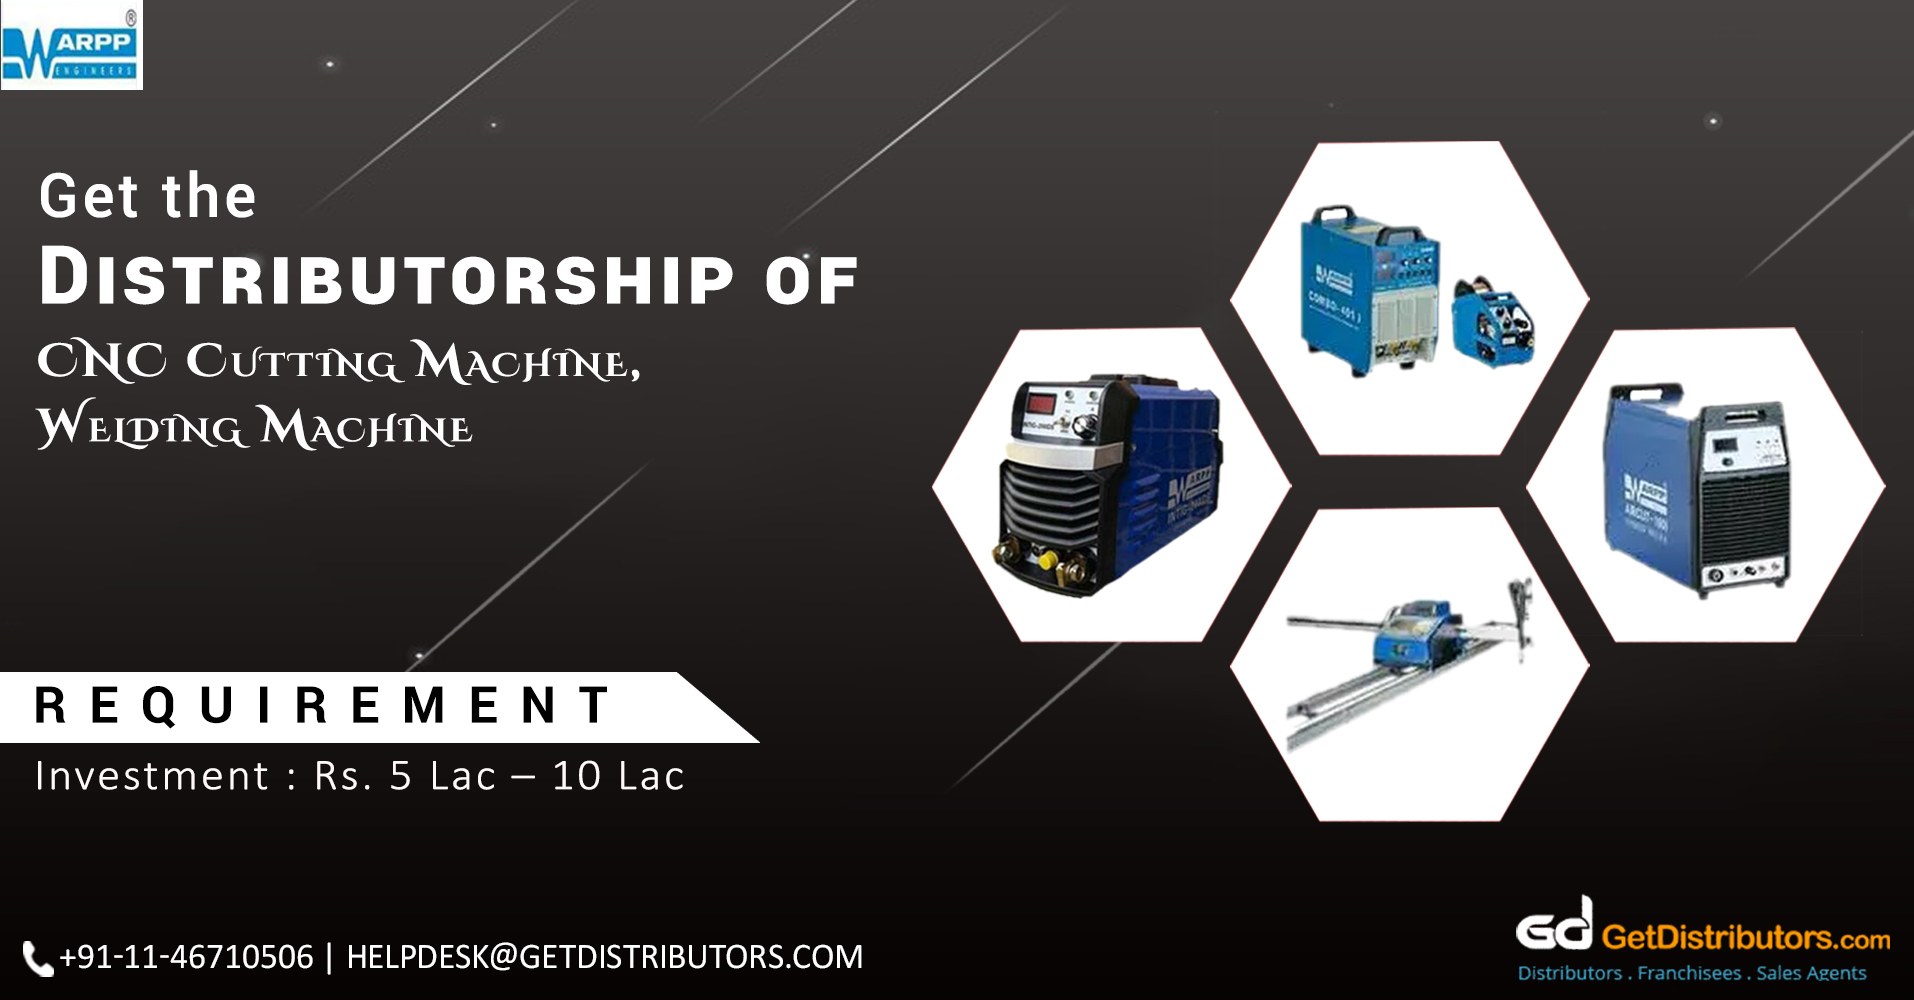 Rugged Welding And Cutting Machines Distributorship At Reasonable Rates